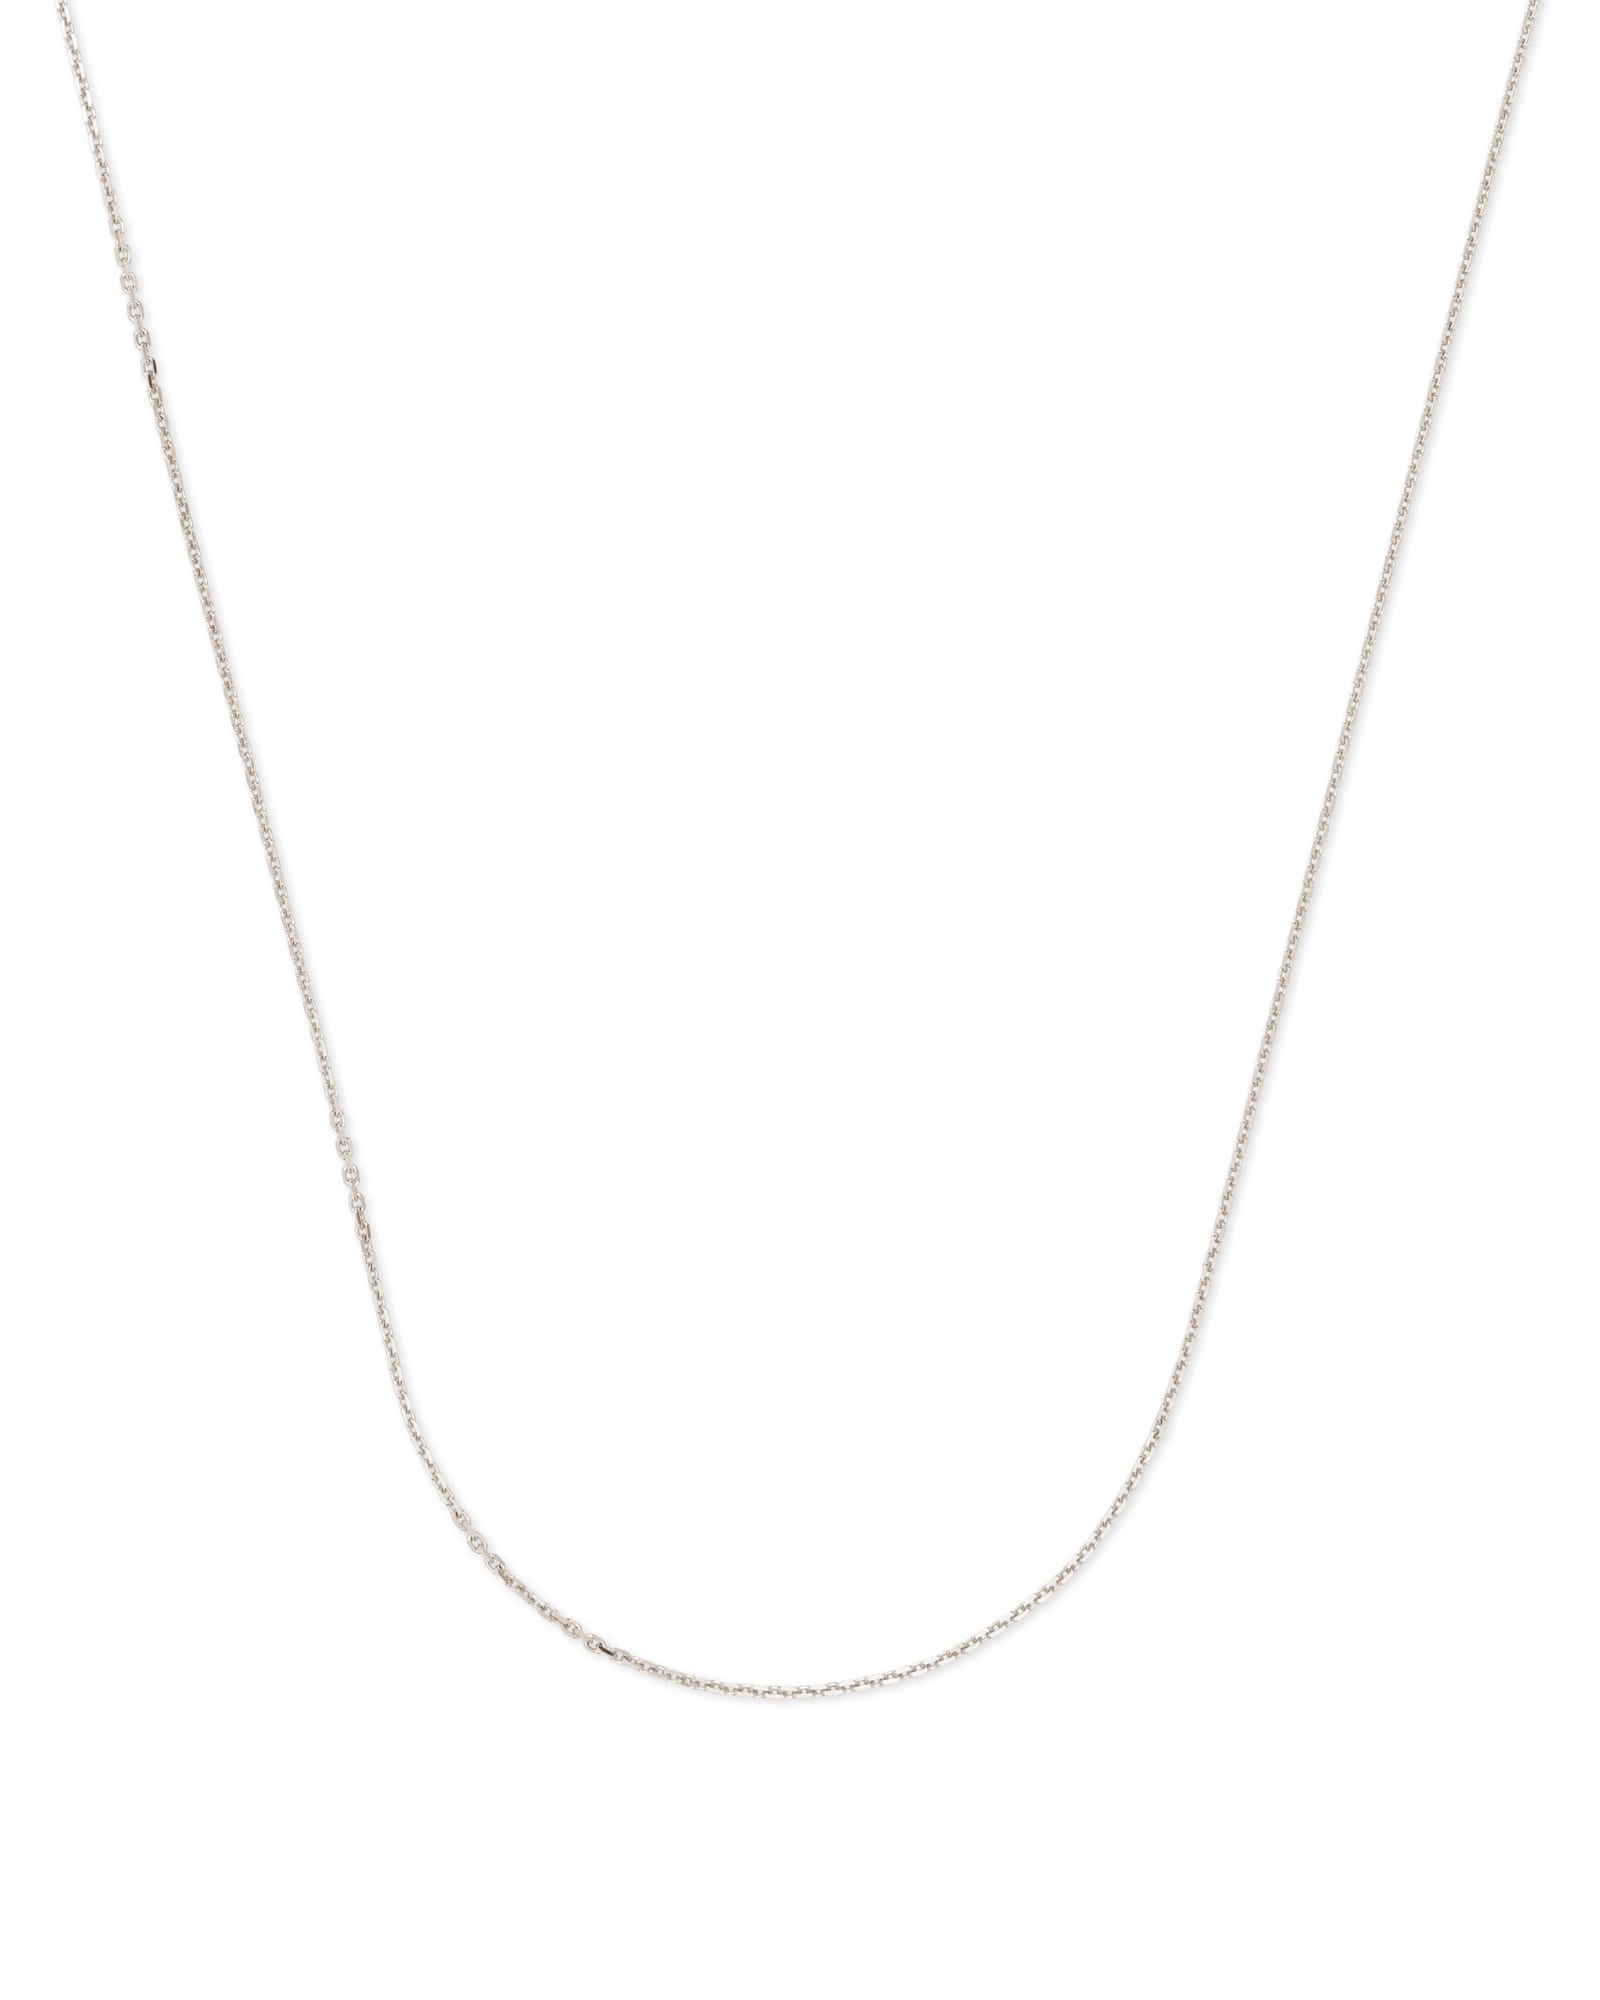 Thin Silver Chain Necklaces: Top 12 Most Popular Styles Right Now